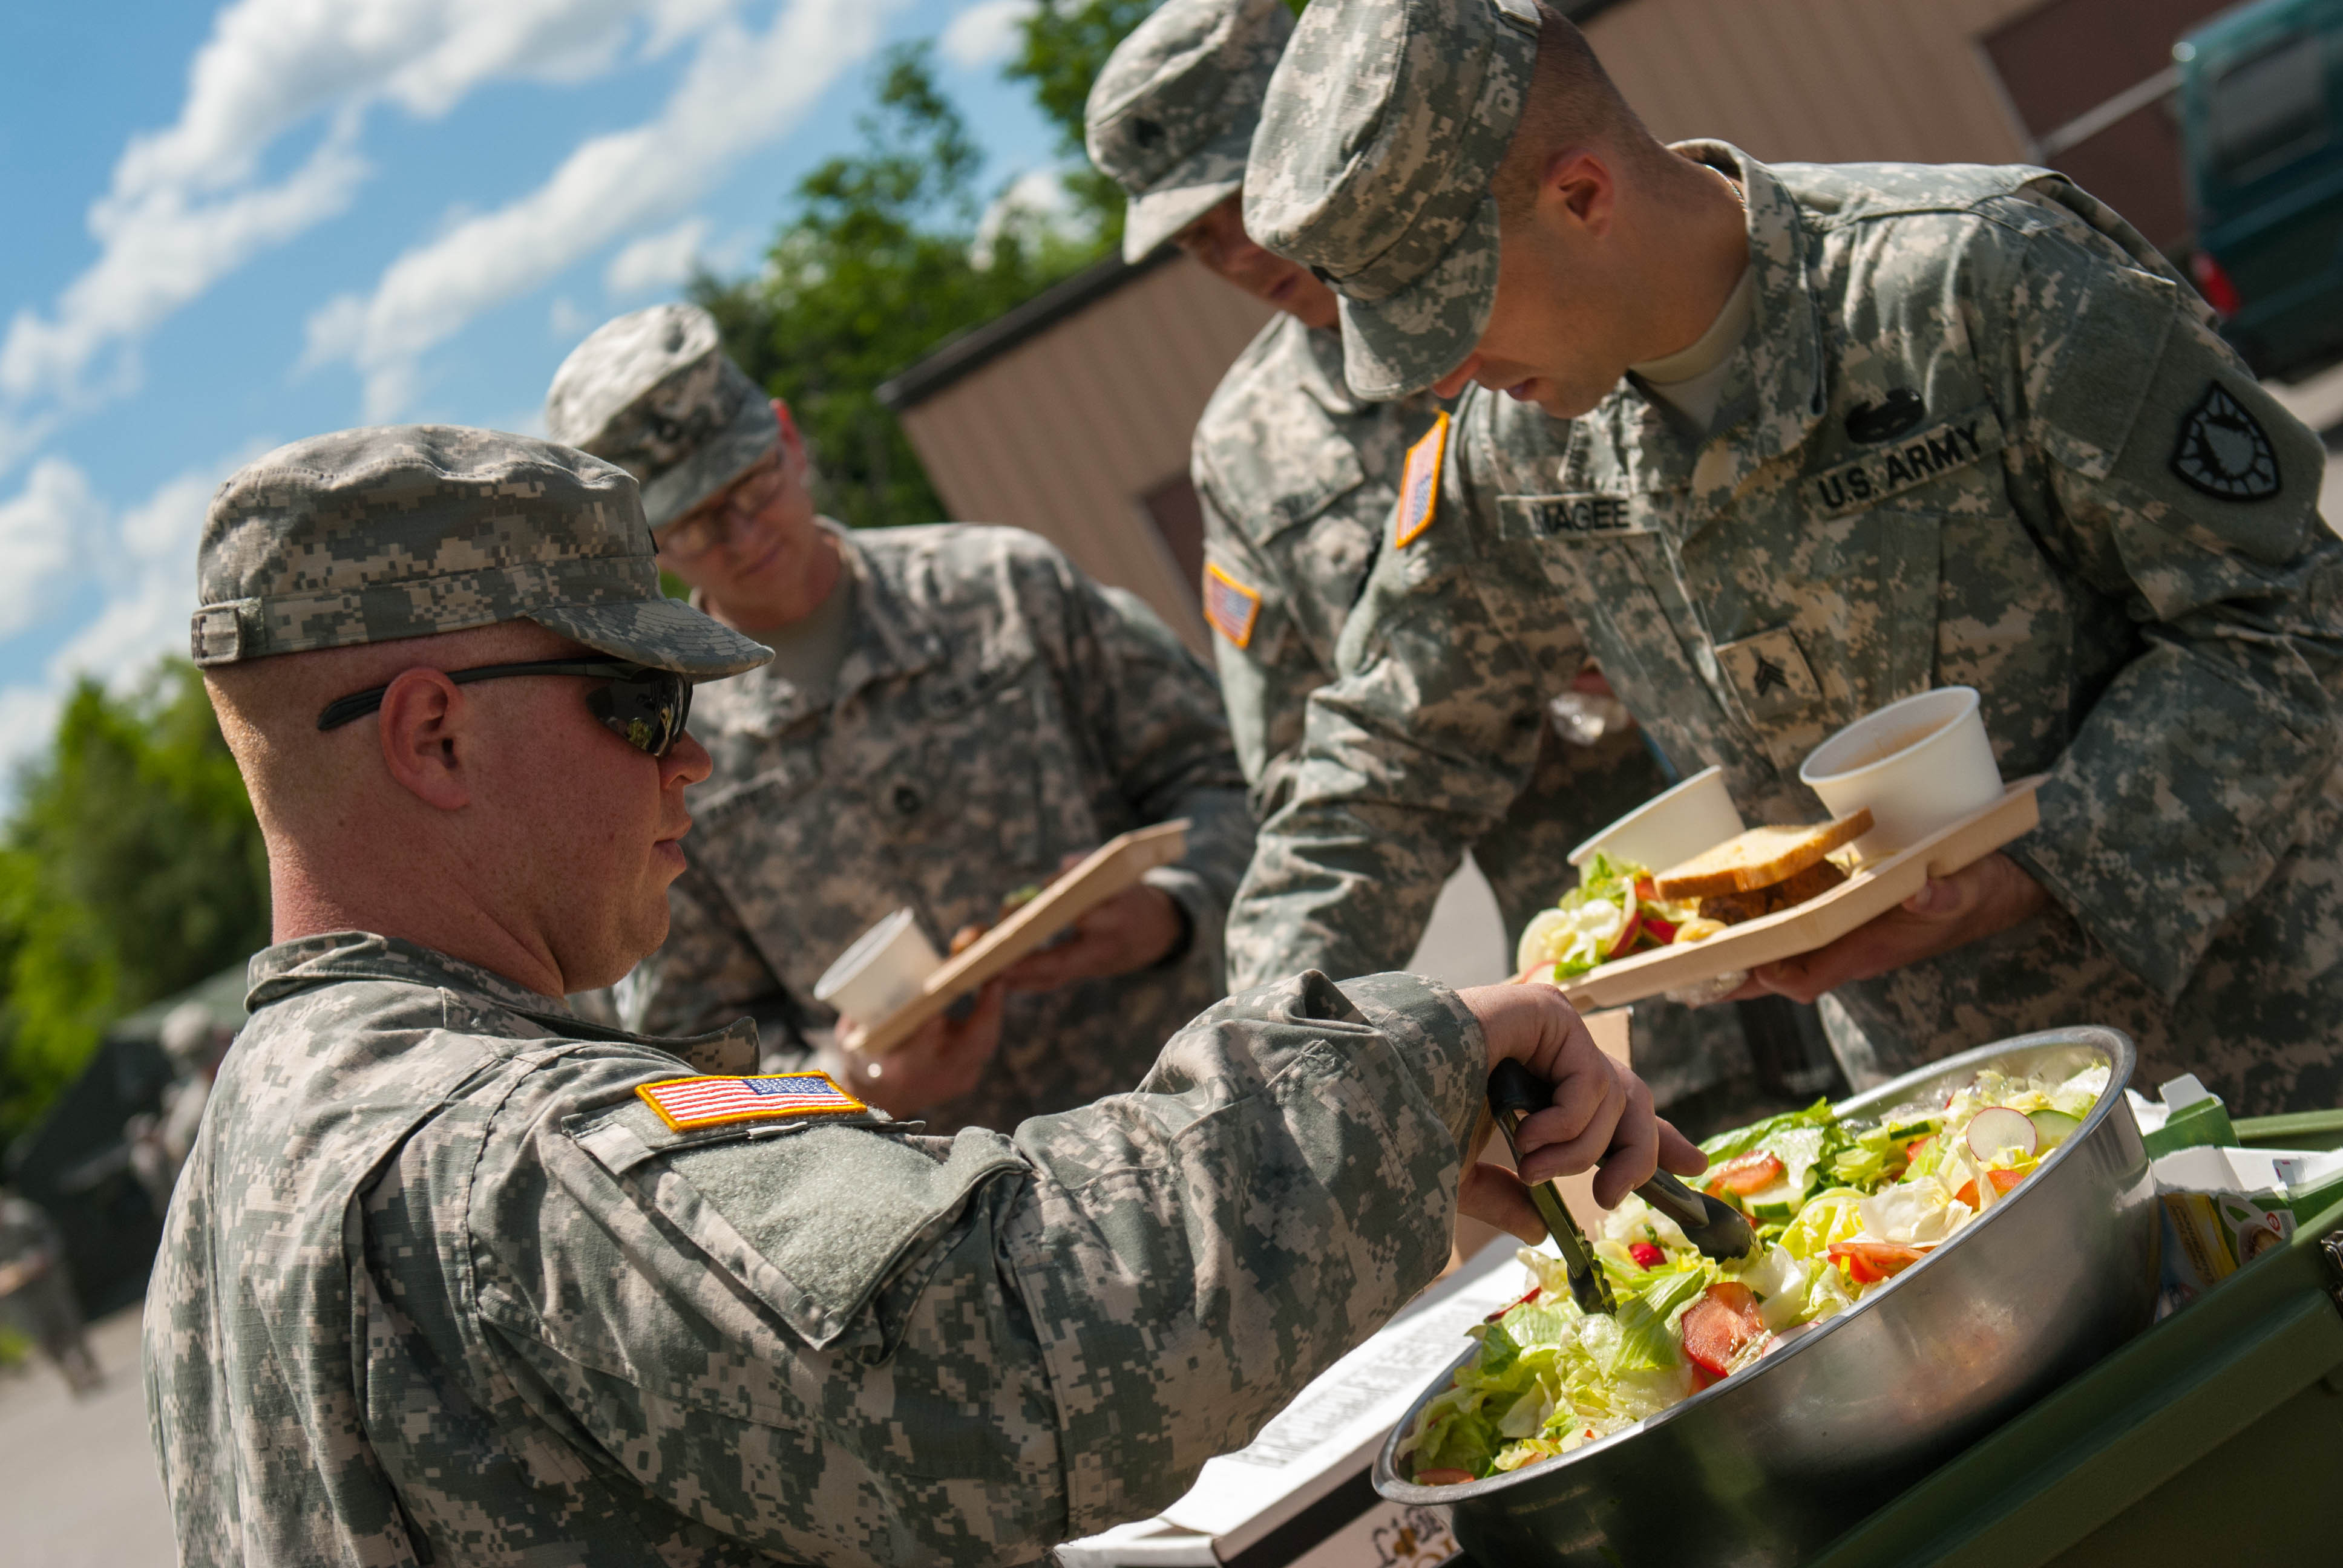 Soldiers helping themselves to salad make healthy performance nutrition choices that fuel military workouts and military well